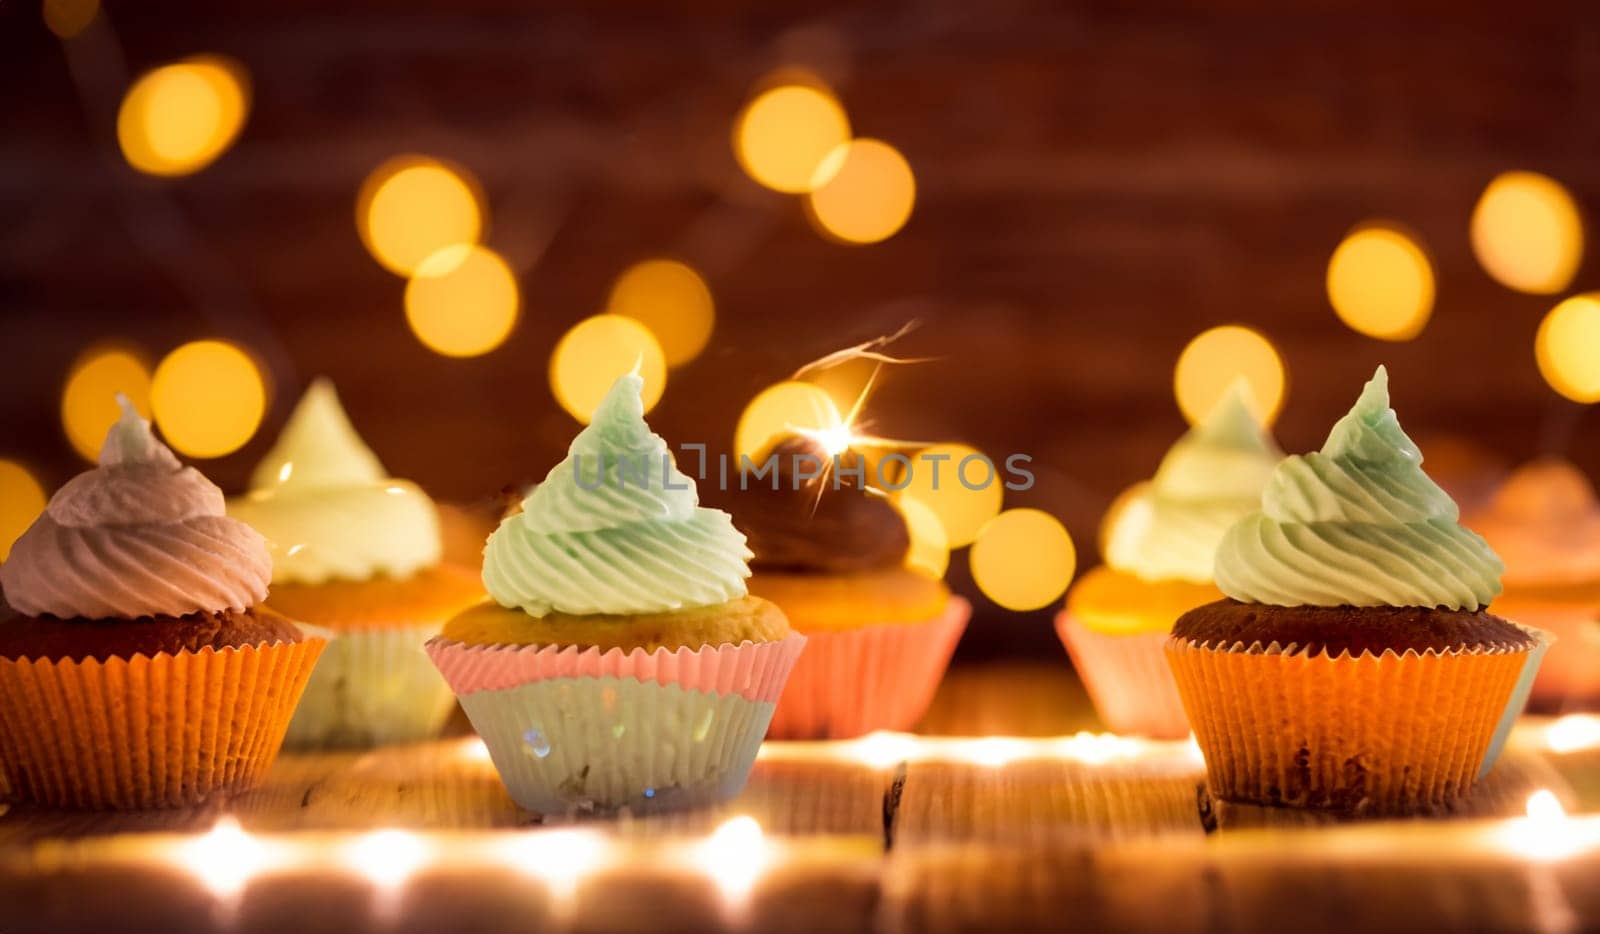 fresh cupcakes in a kitchen with lights and warm blurry bokeh background